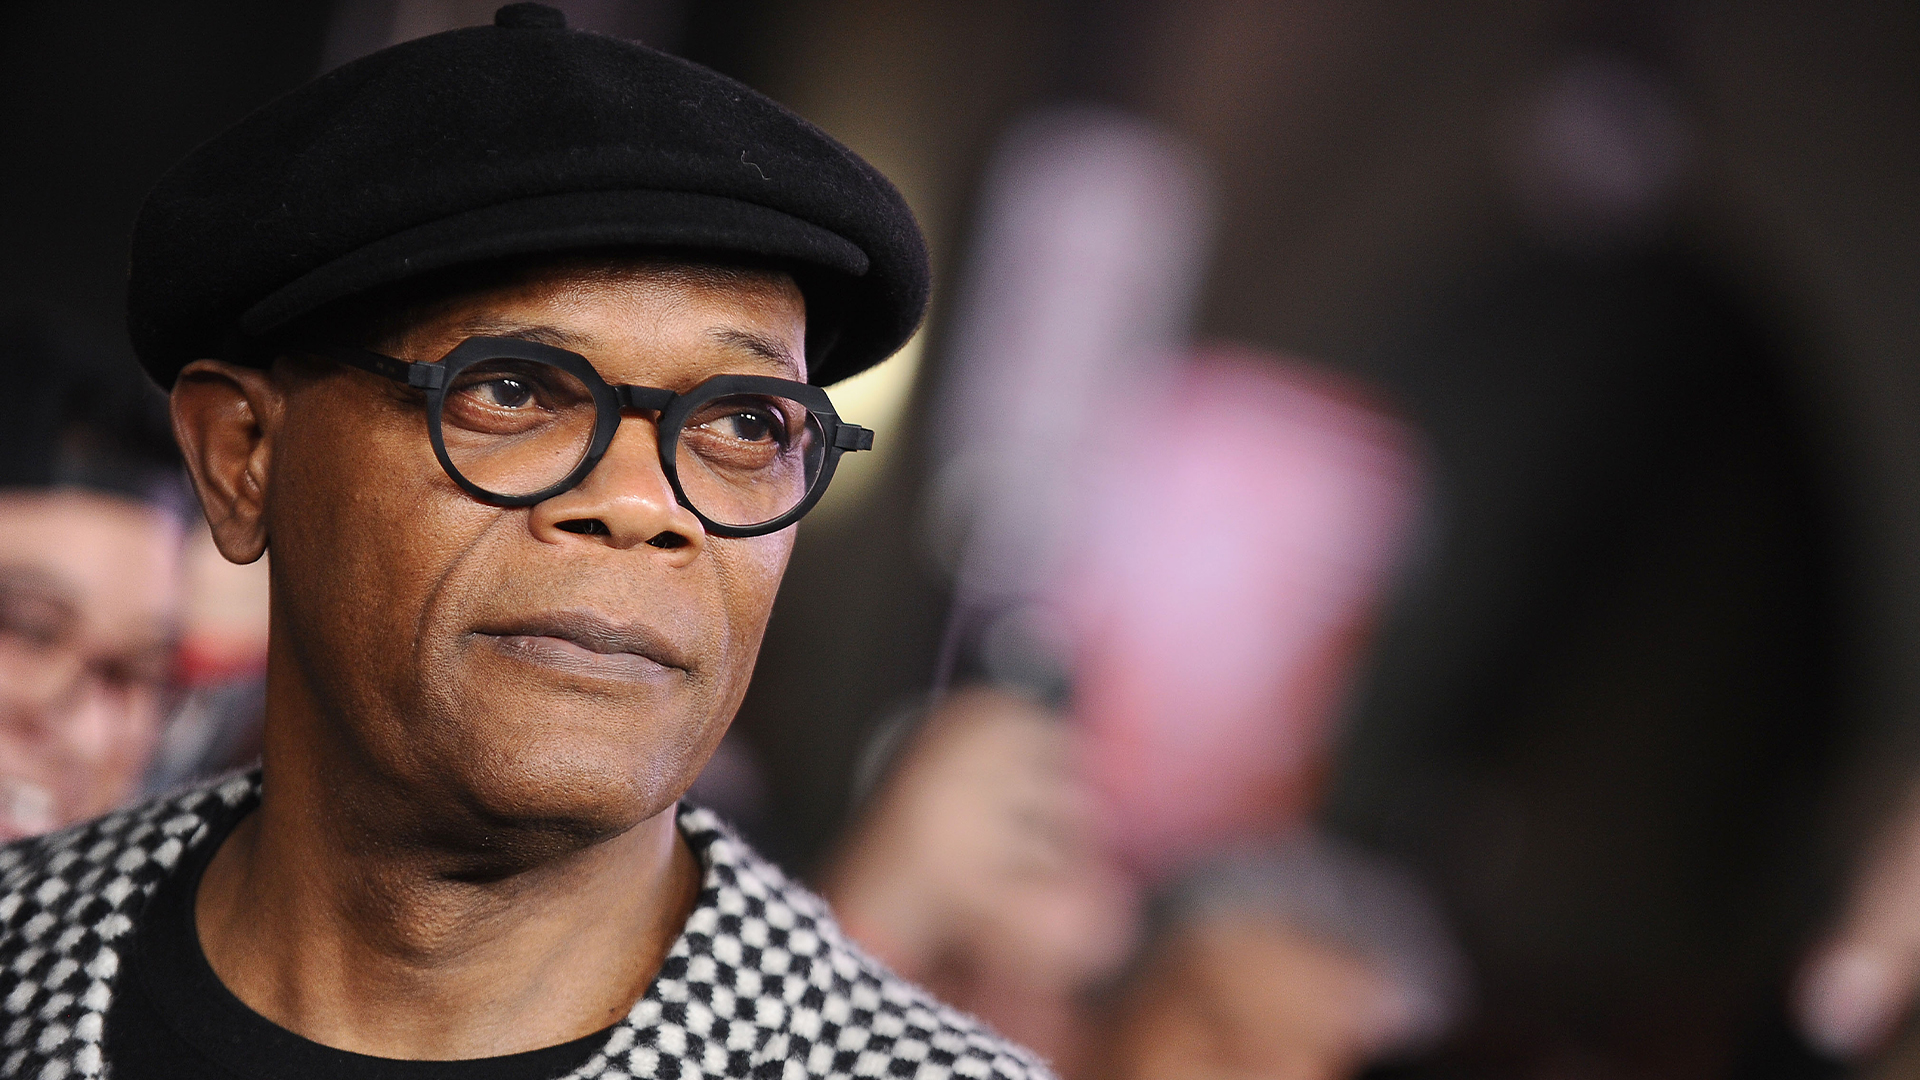 Samuel L. Jackson Gives The Status Of His Dave's Hot Chicken Investment And Reveals Accountant's Advice On The Restaurant Industry